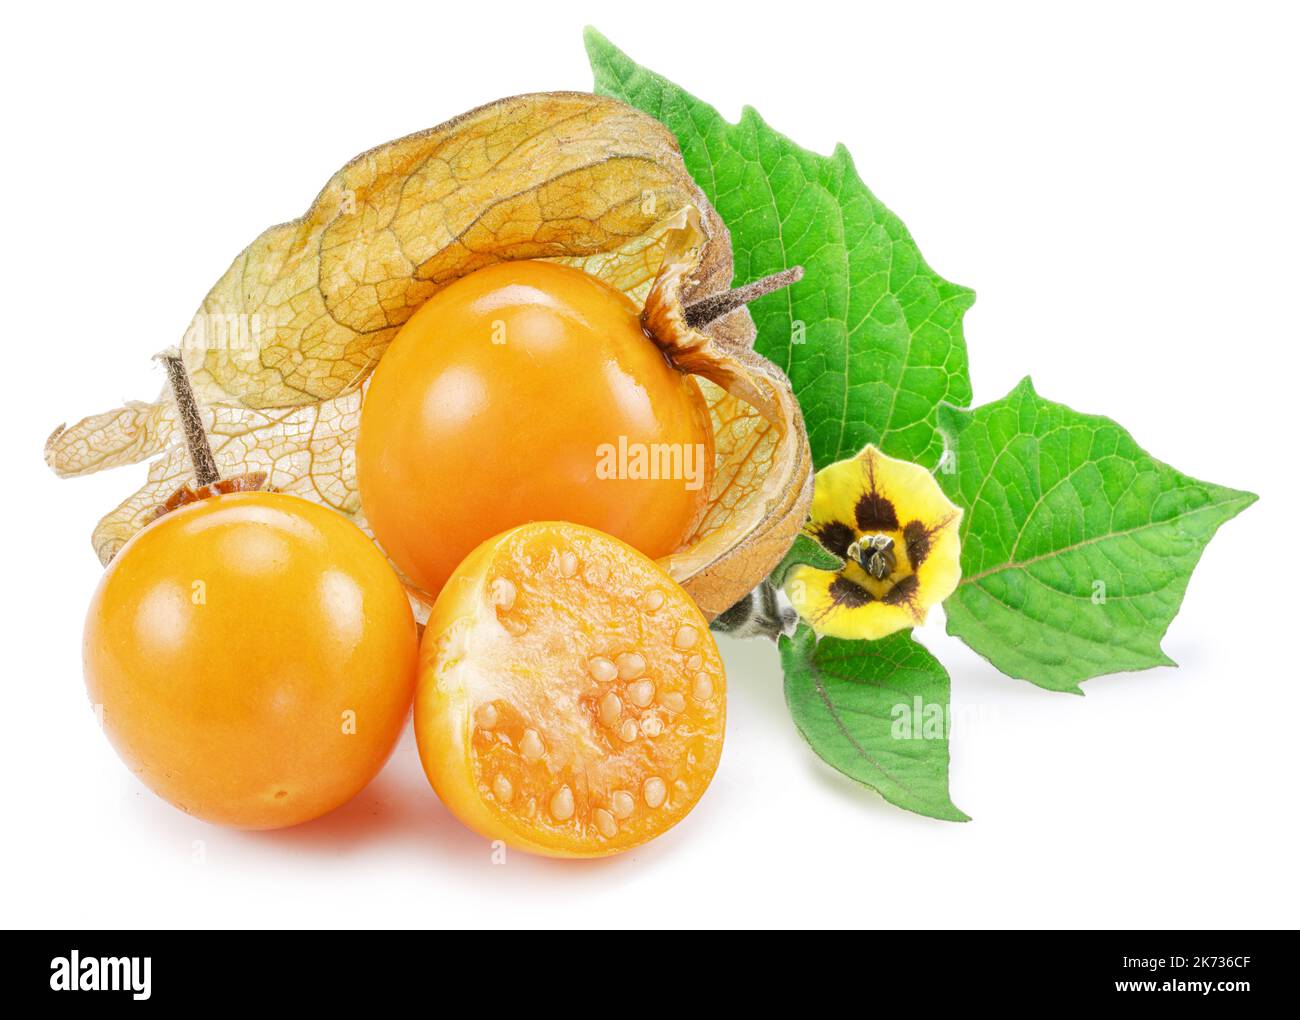 Ripe physalis or golden berry fruits with leaves and flower isolated on white background. Stock Photo